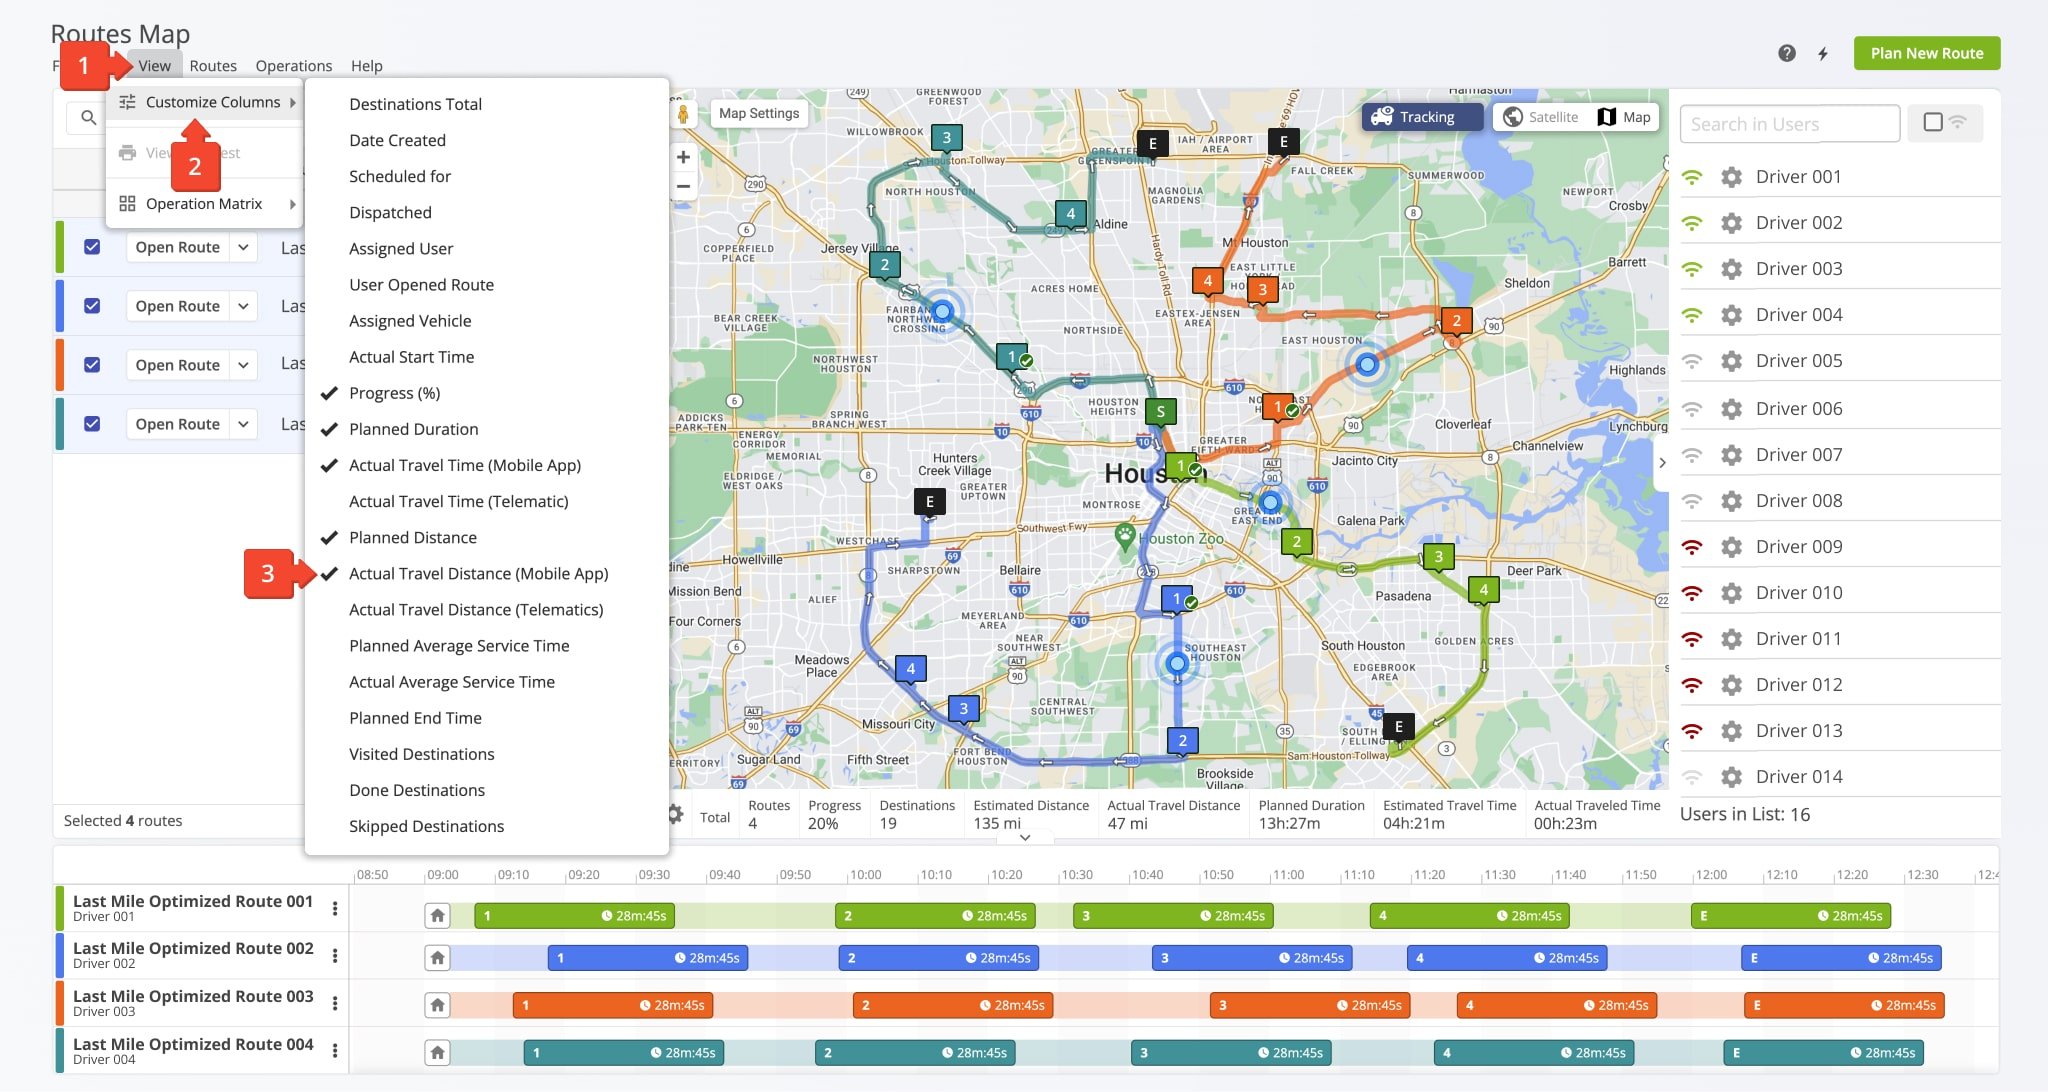 You can customize both the Routes List and Routes Map by enabling GPS tracking data columns. This way, you can easily view, compare, and analyze the GPS tracking statistics of different routes and users.